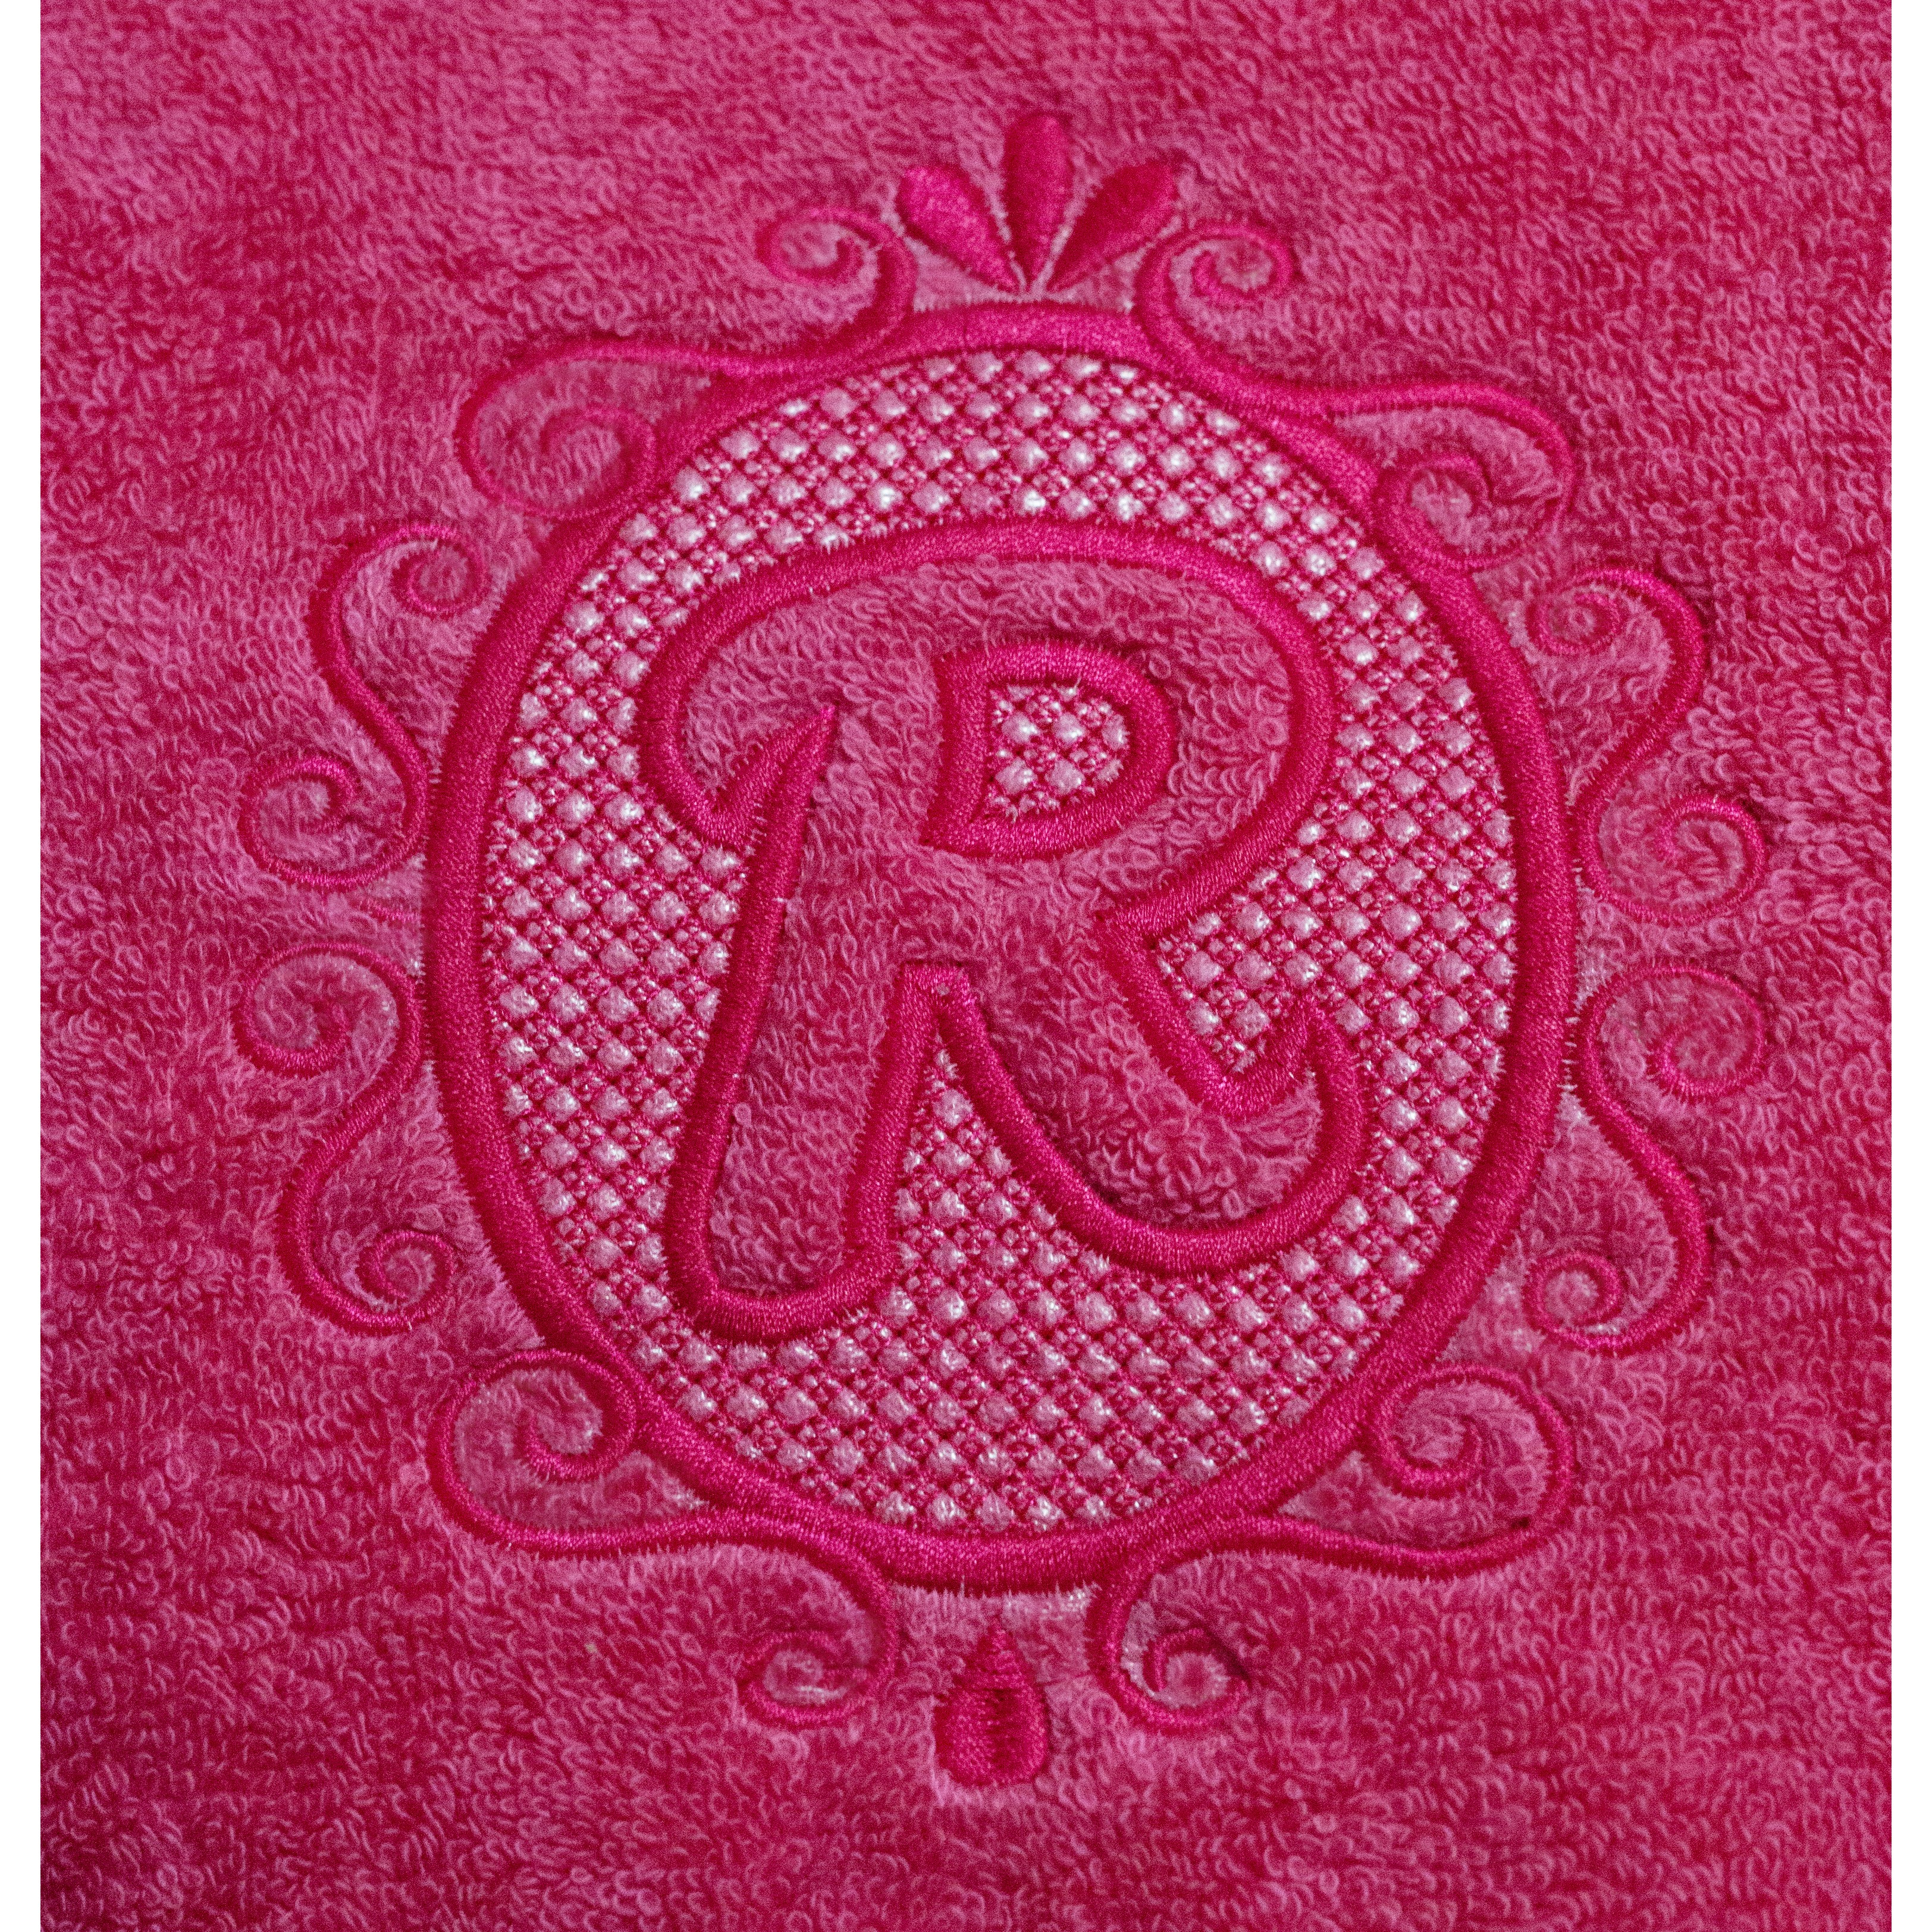 Monogram Patterns For Embroidery 14 Embossed Embroidery Monogram Fonts Images Embossed Monogram